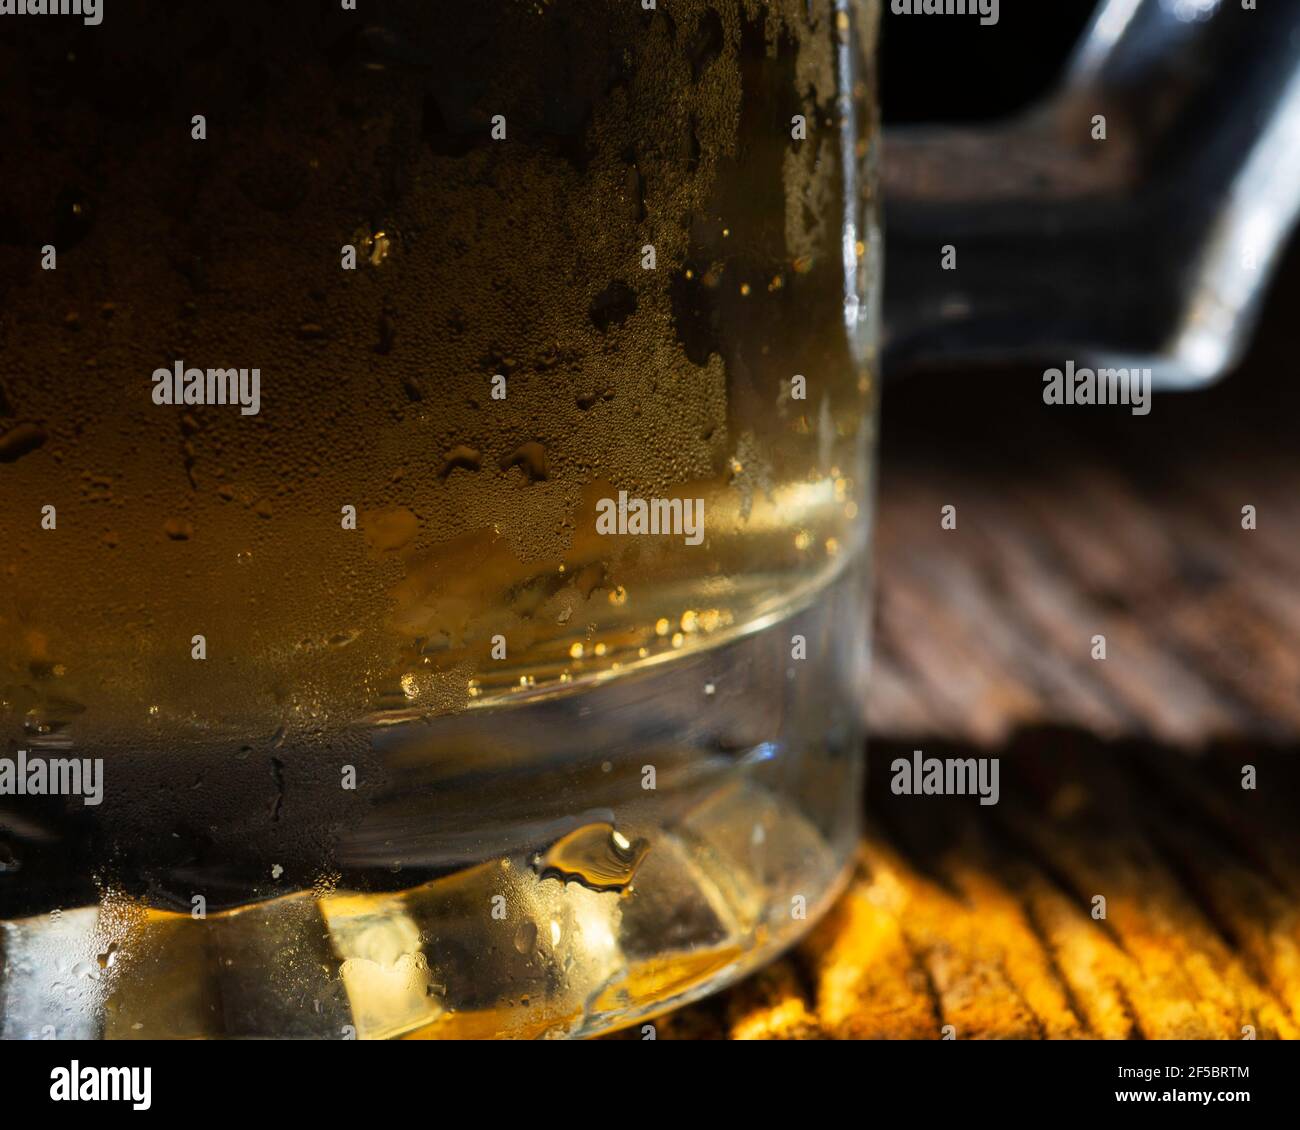 a mug of beer on a black background Stock Photo